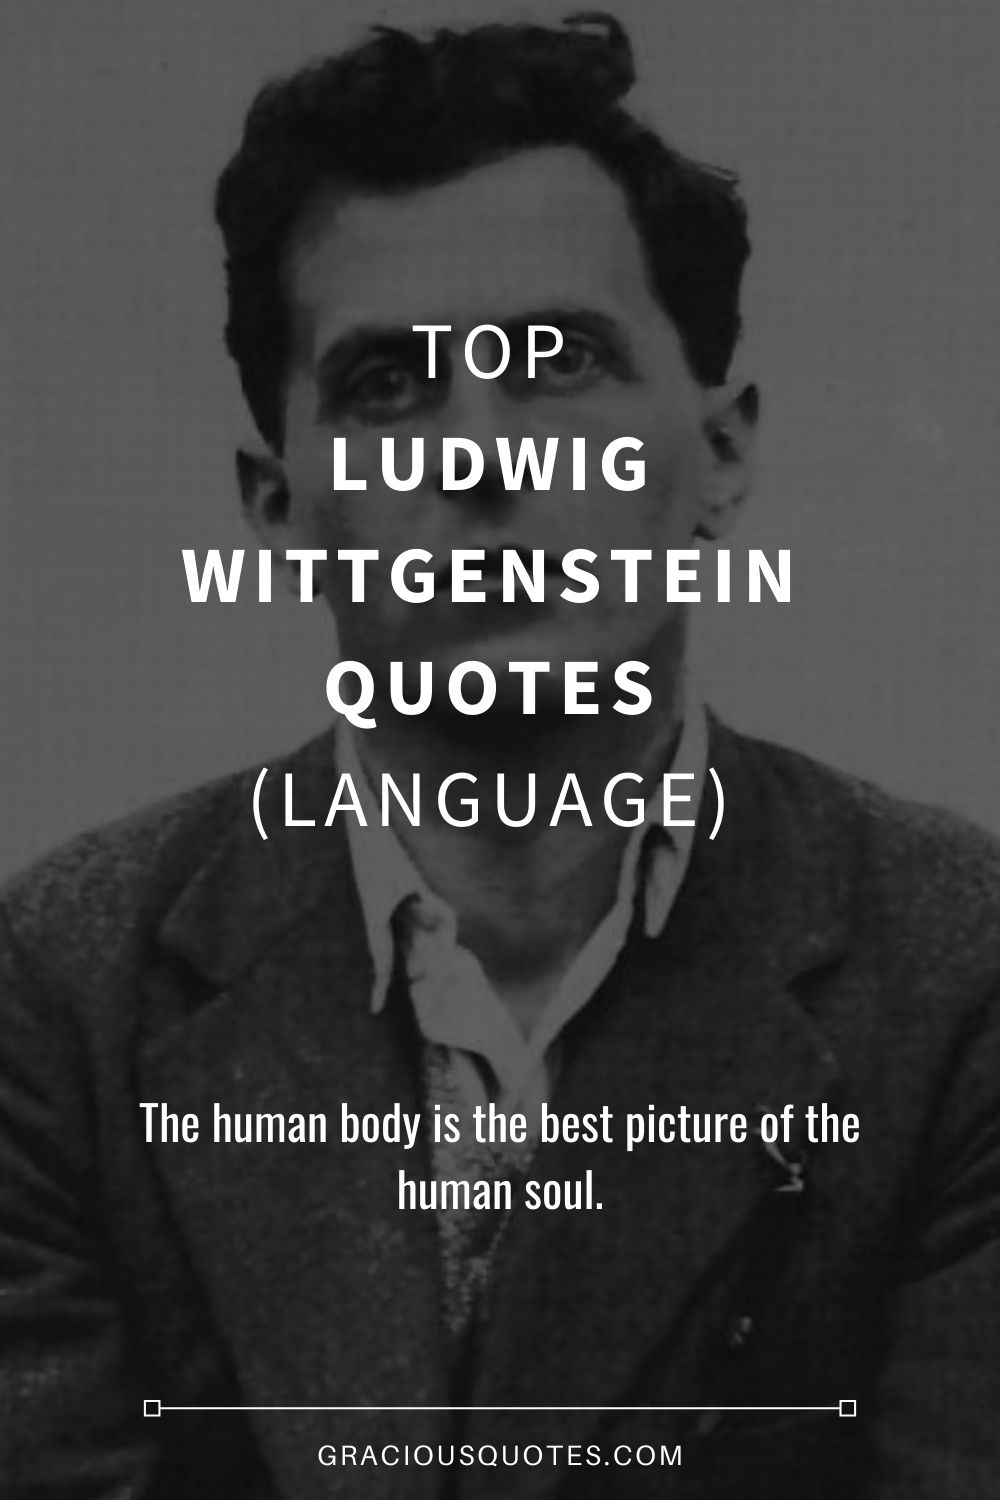 Top Ludwig Wittgenstein Quotes (LANGUAGE) - Gracious Quotes